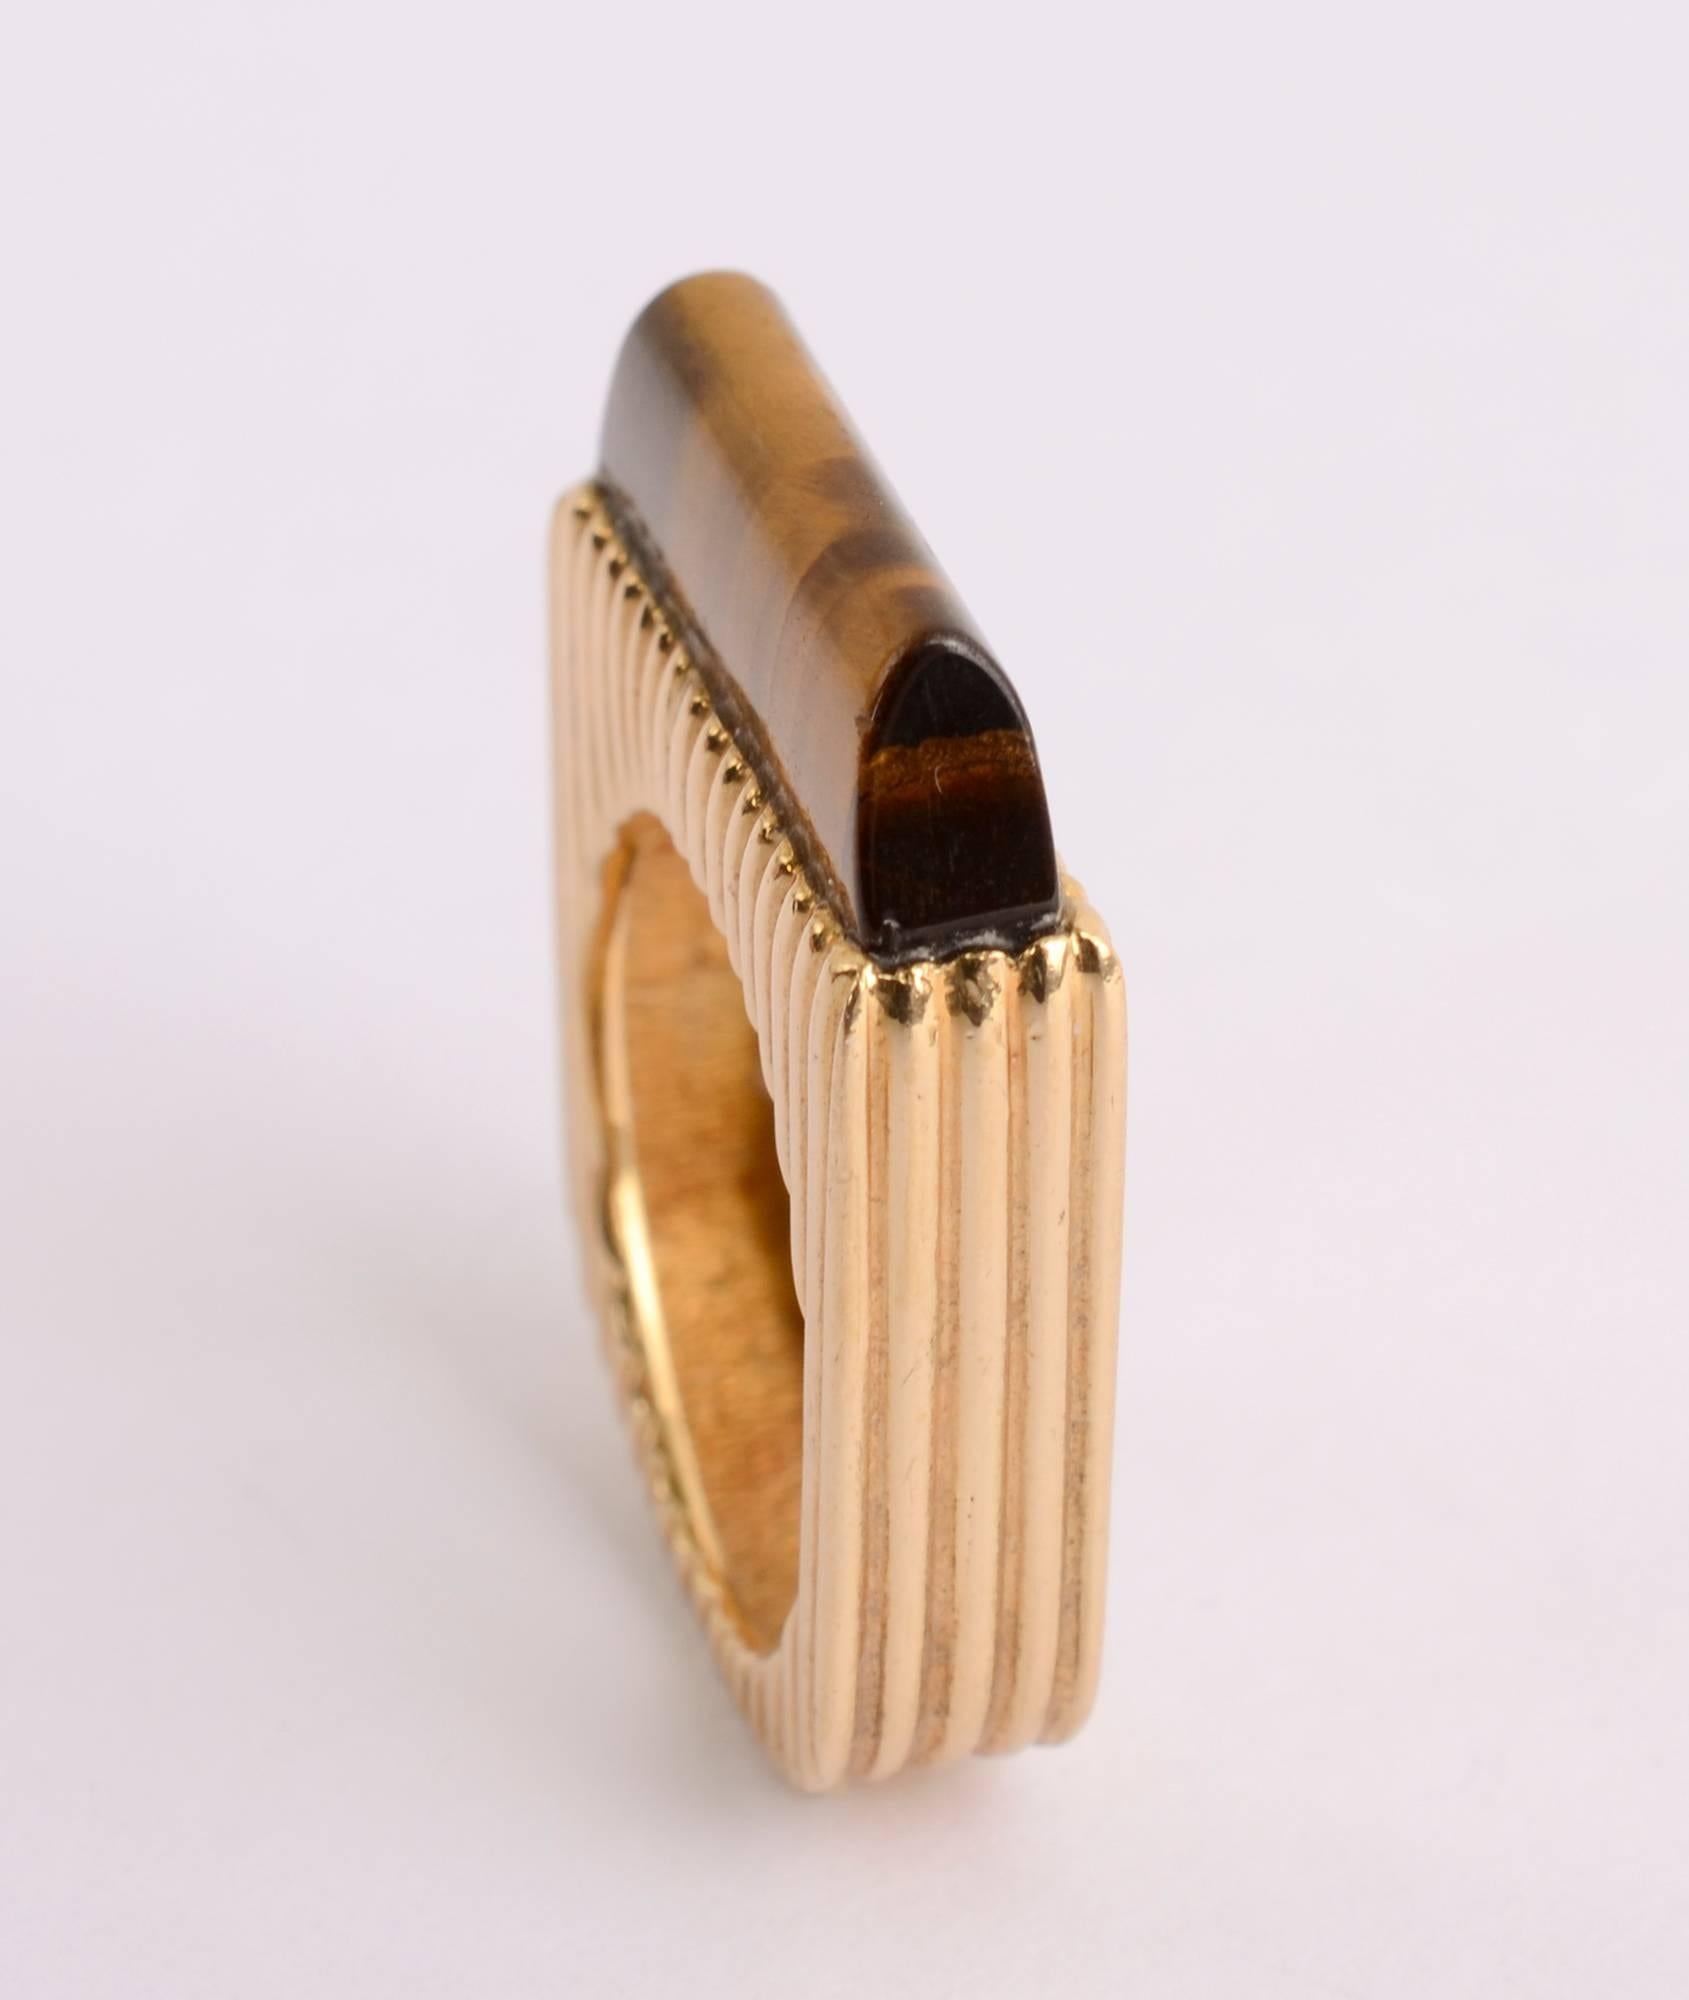 Stylish modernist 18 karat gold ring with tiger's eye. It's interesting that it is very much in the style of Dinh Van (although not the price tag) and it has the maker's initials DY. I do not recognize them
The gold is striated throughout. The stone